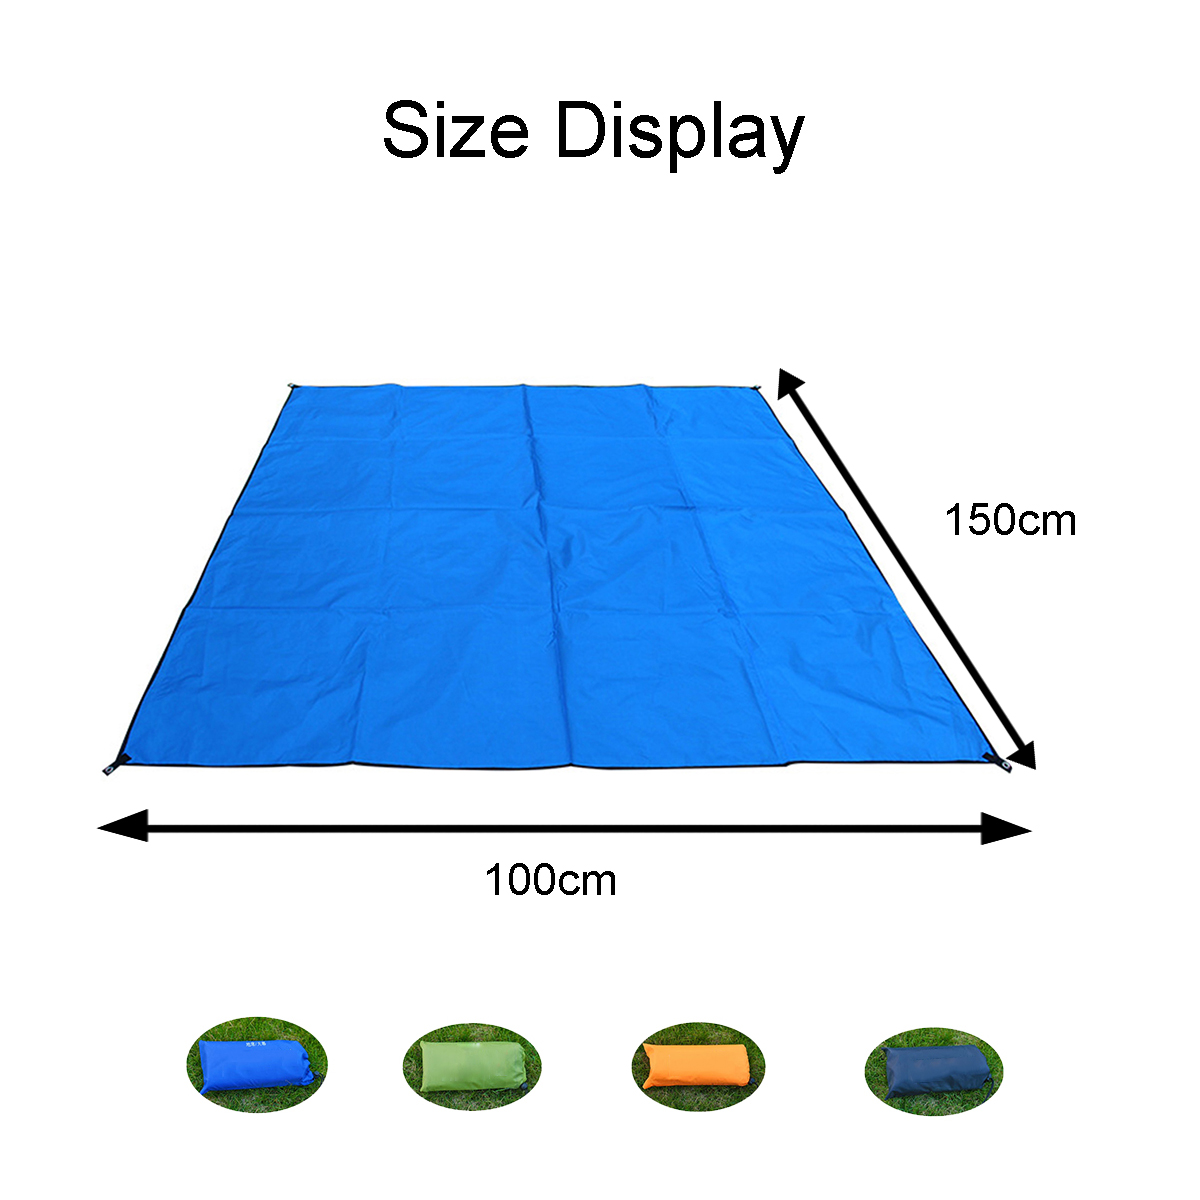 100150CM-Solid-Color-Waterproof-Pocket-Outdoor-Picnic-Camping-Mat-Sand-Free-Beach-Blanket-Picknick-M-1761744-5